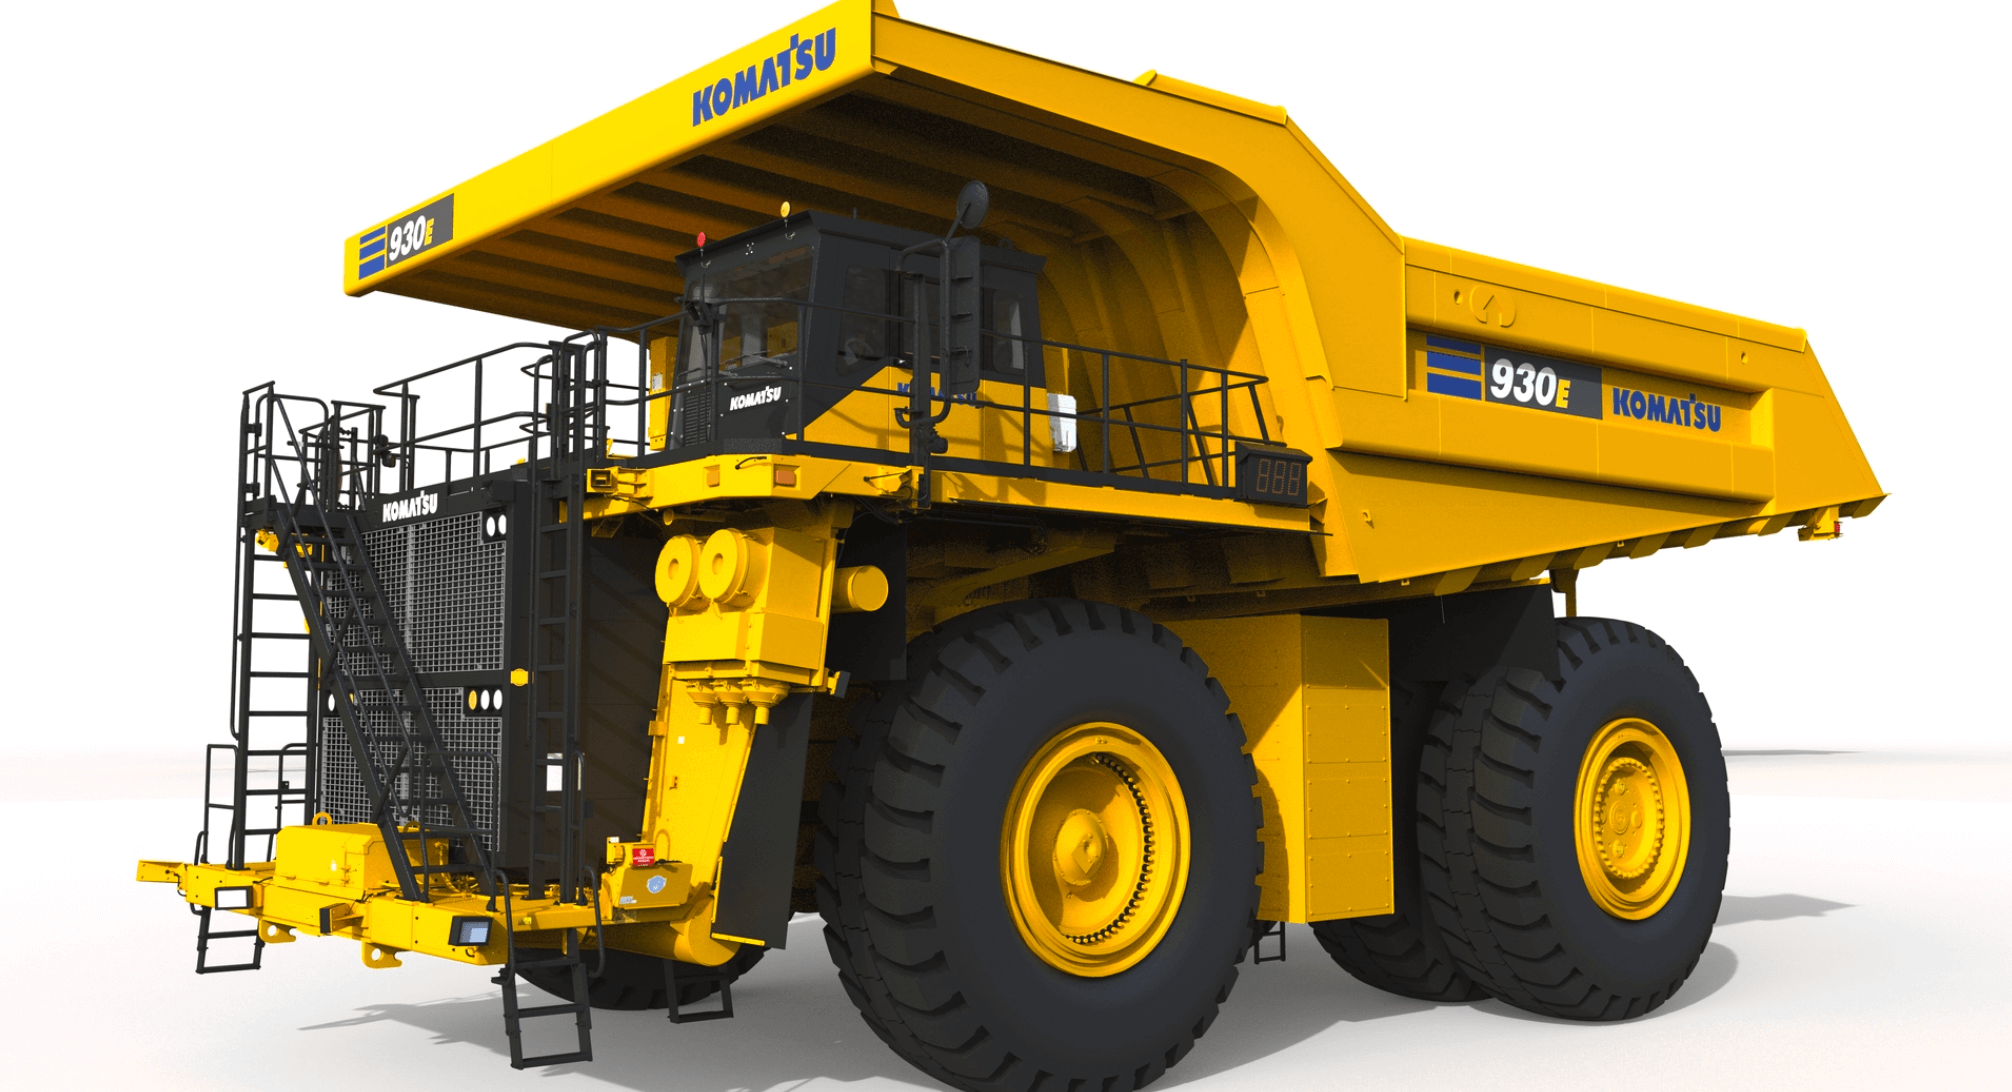 Digging Deep for Sustainability: GM and Komatsu's Hydrogen Mining Truck